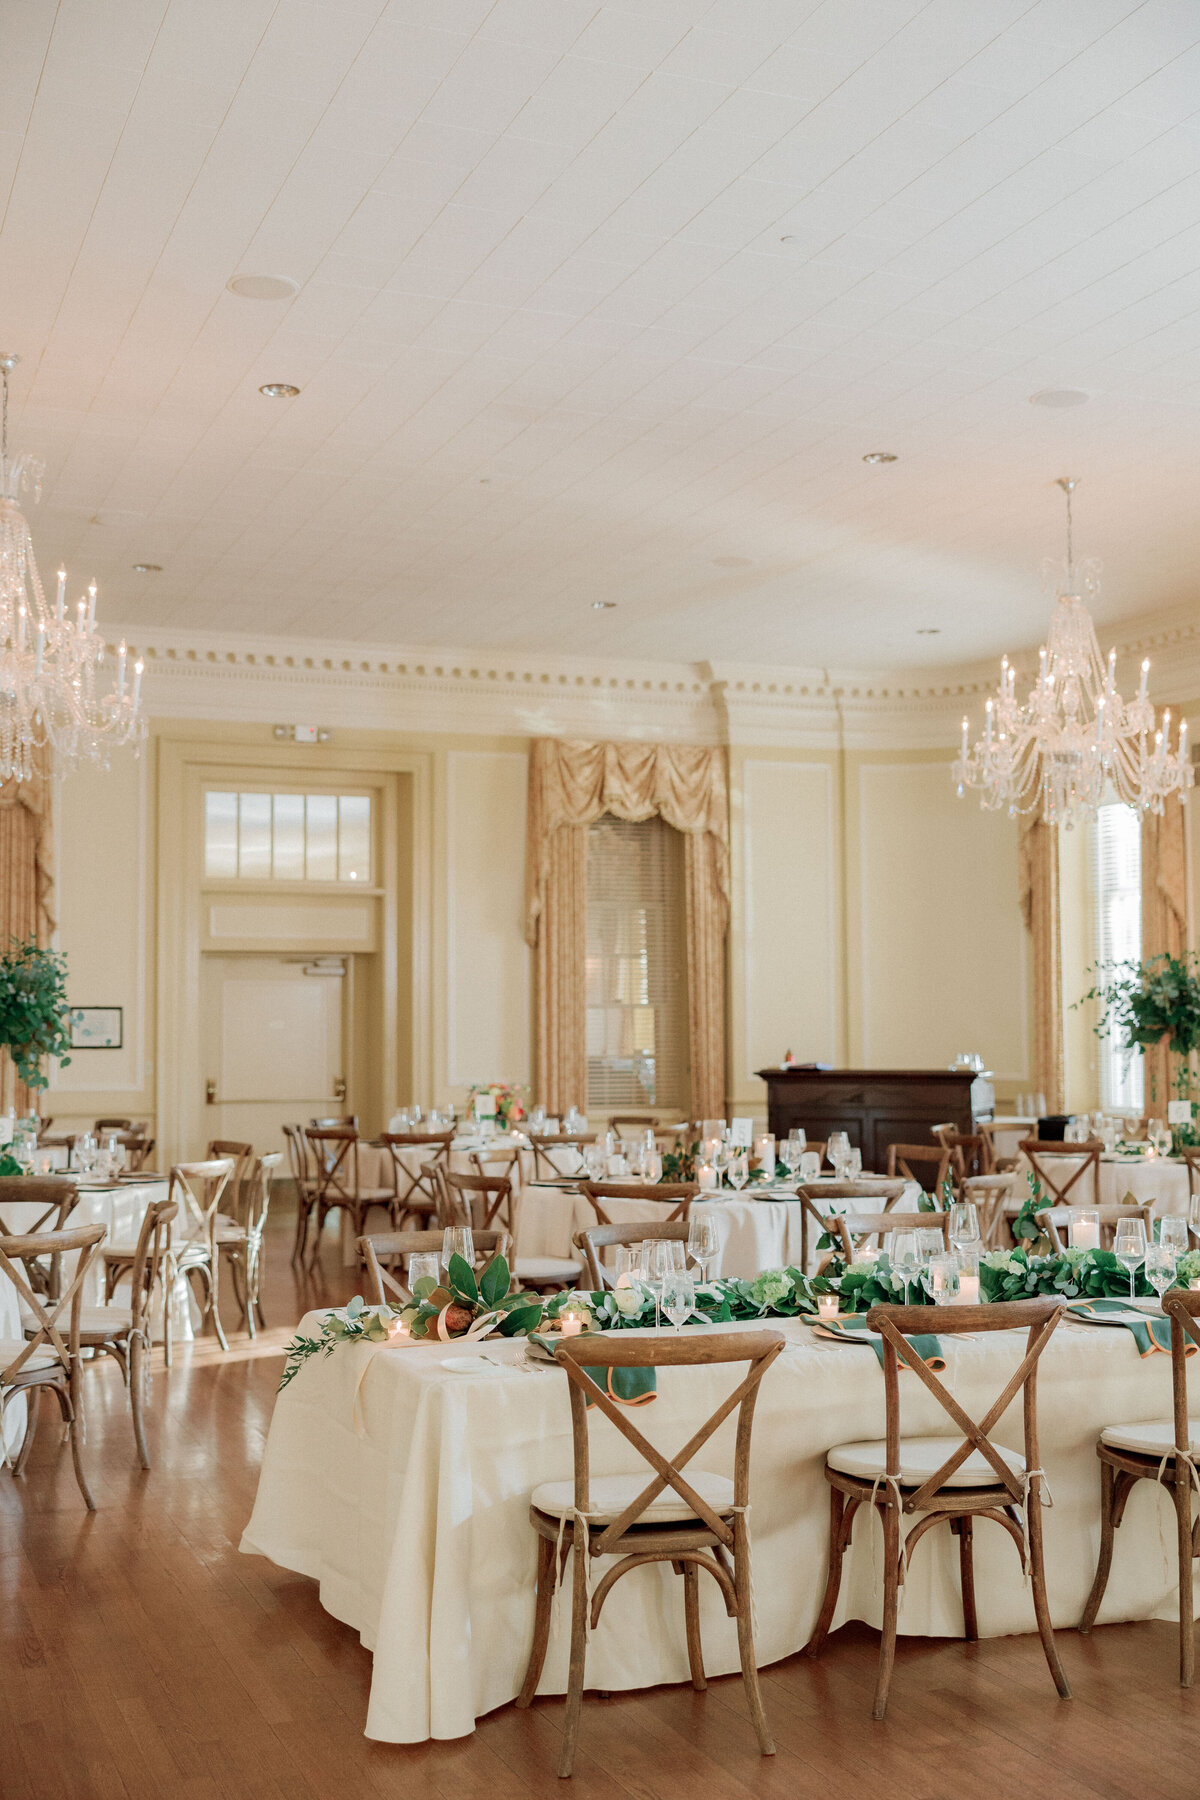 Indoor wedding reception with neutral linens,  wood chairs, and simple greenery tablescape